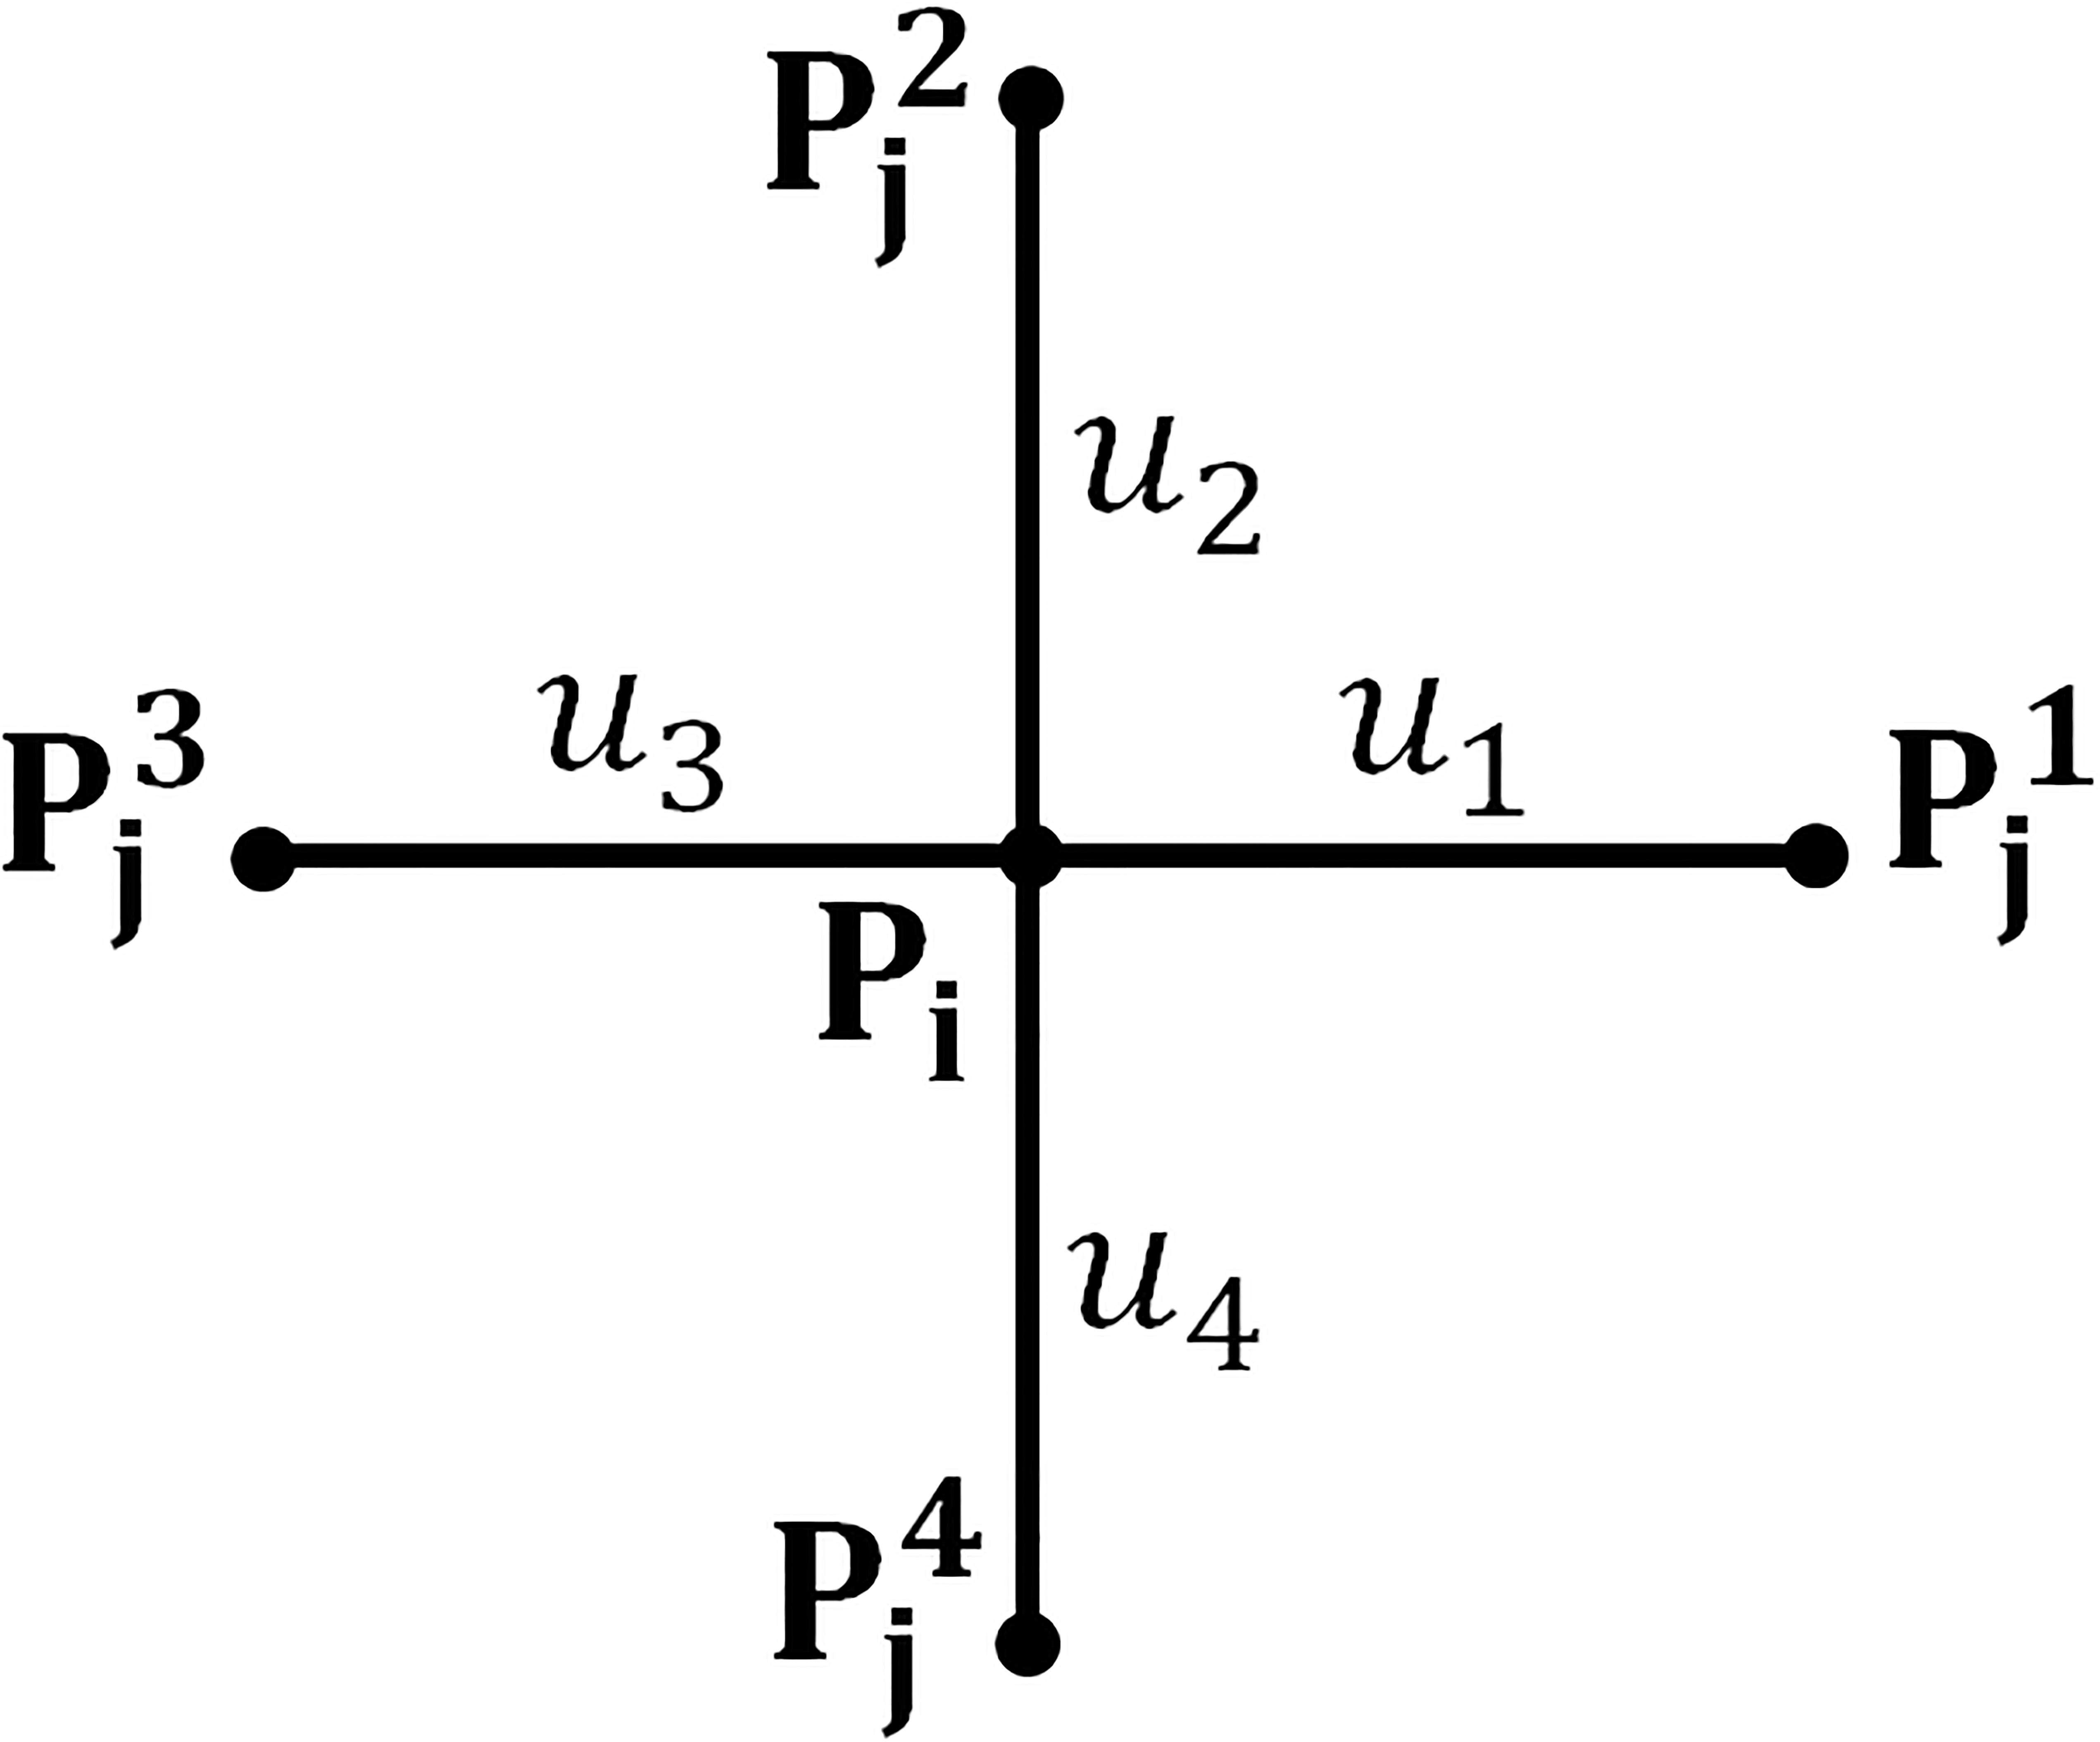 A grid with four local connections: chain element i at position 𝐏i is connected with four neighboring chain elements at positions 𝐏j1, 𝐏j2, 𝐏j3 and 𝐏j4 with distances in-between denoted by u1, u2, u3 and u4, respectively.